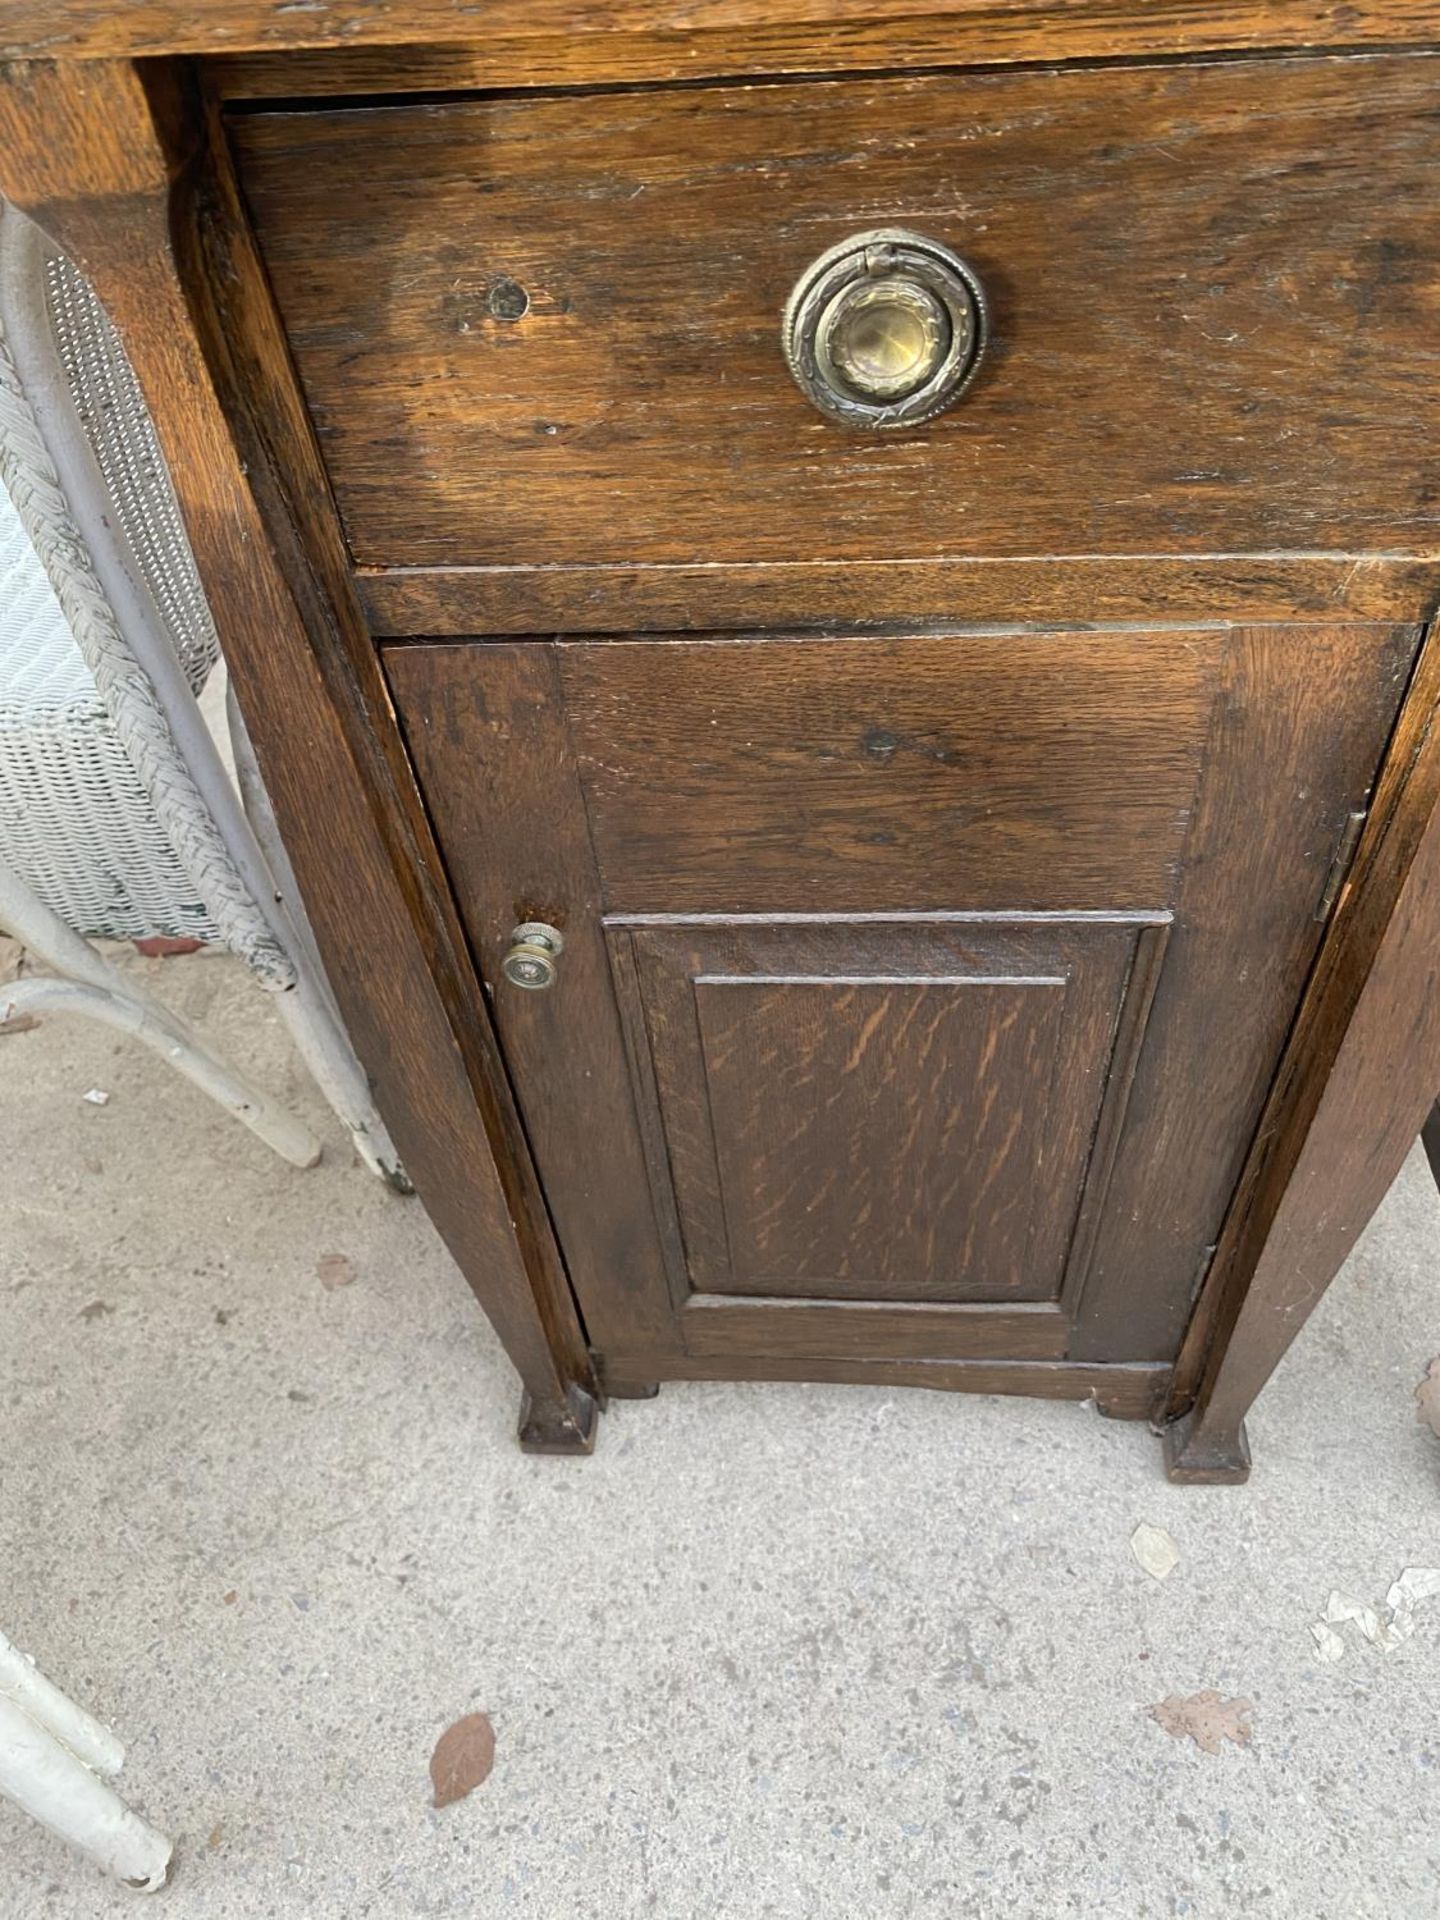 AN OAK POT CUPBOARD WITH ONE DOOR AND ONE DRAWER - Image 3 of 3